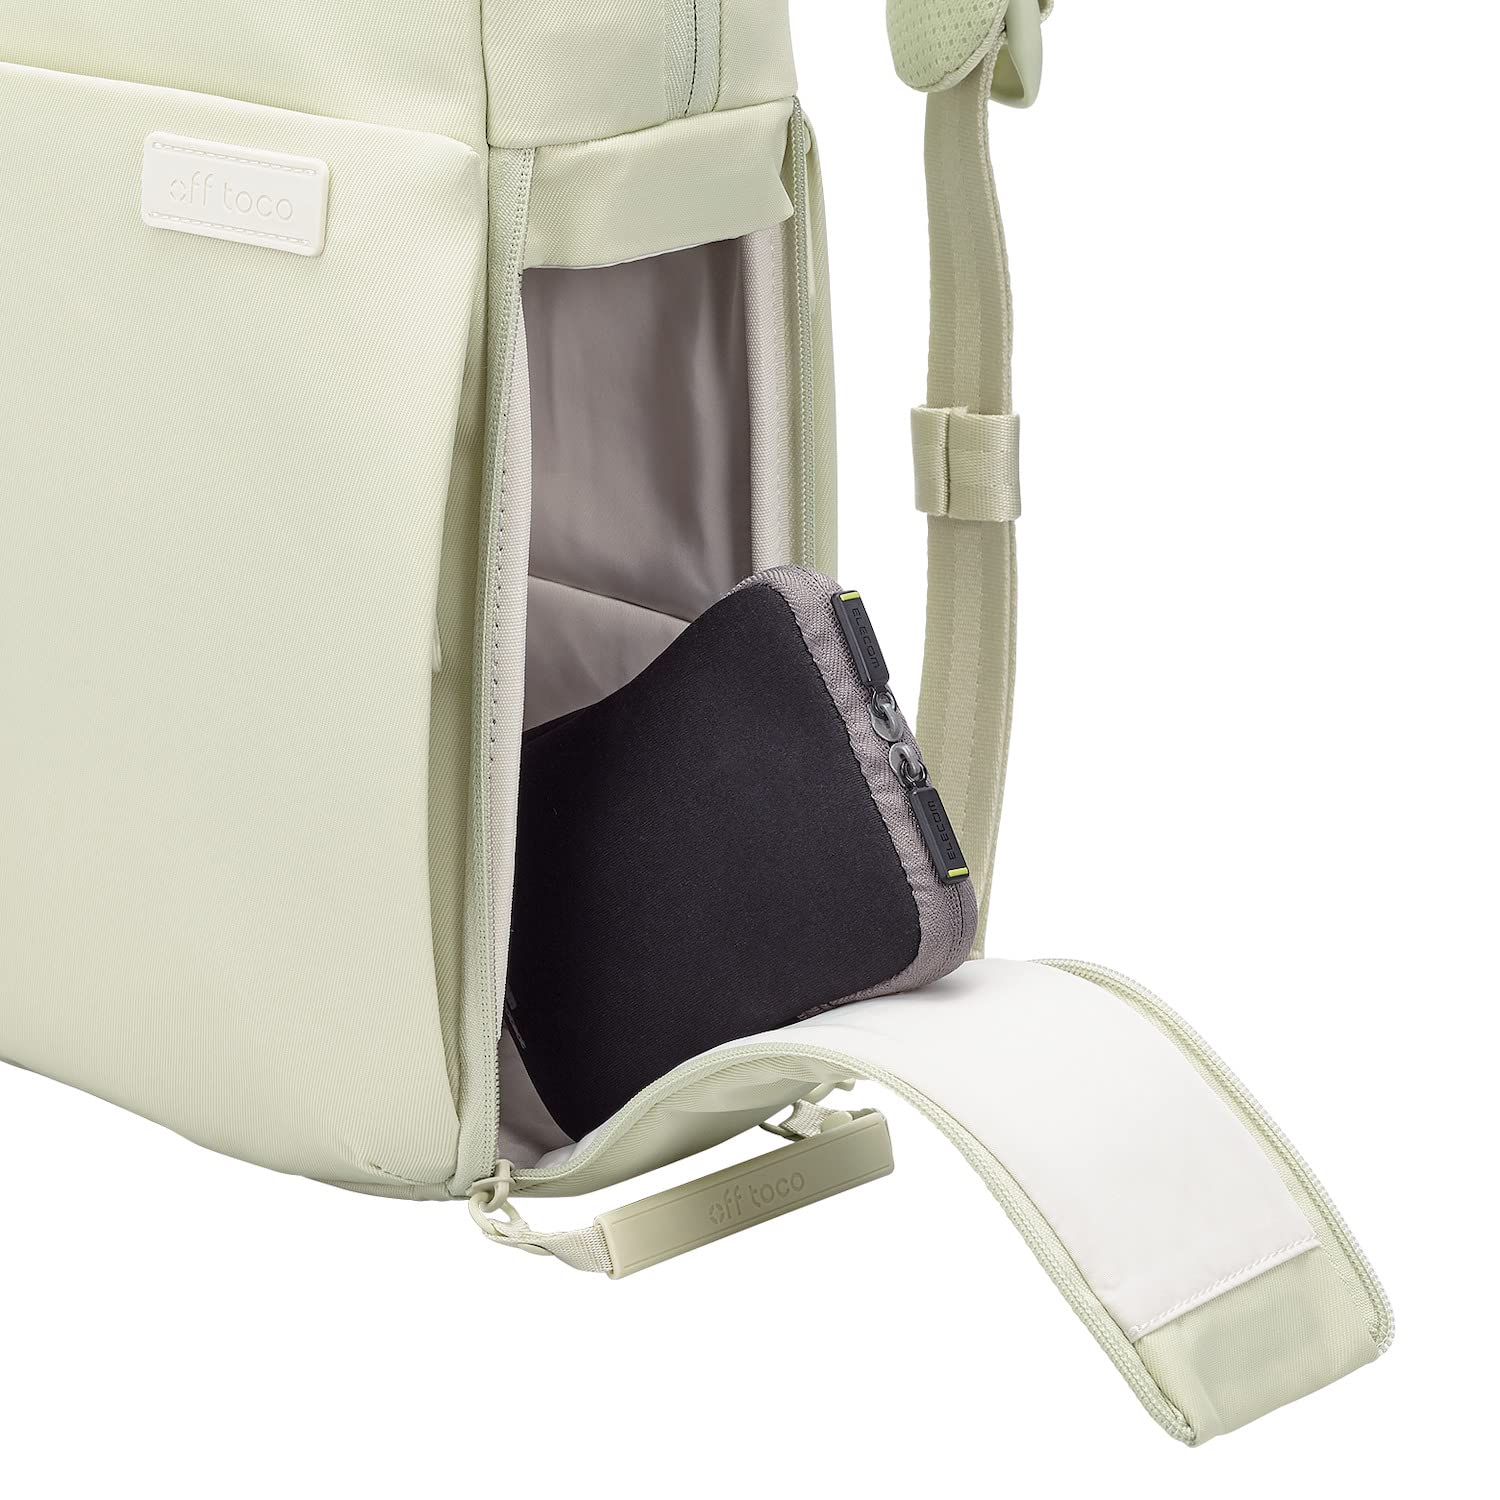 Elecom BM-OF04GN2 Off-toco Computer Case, 3-Way PC Backpack, Business & Casual, Green, Size M